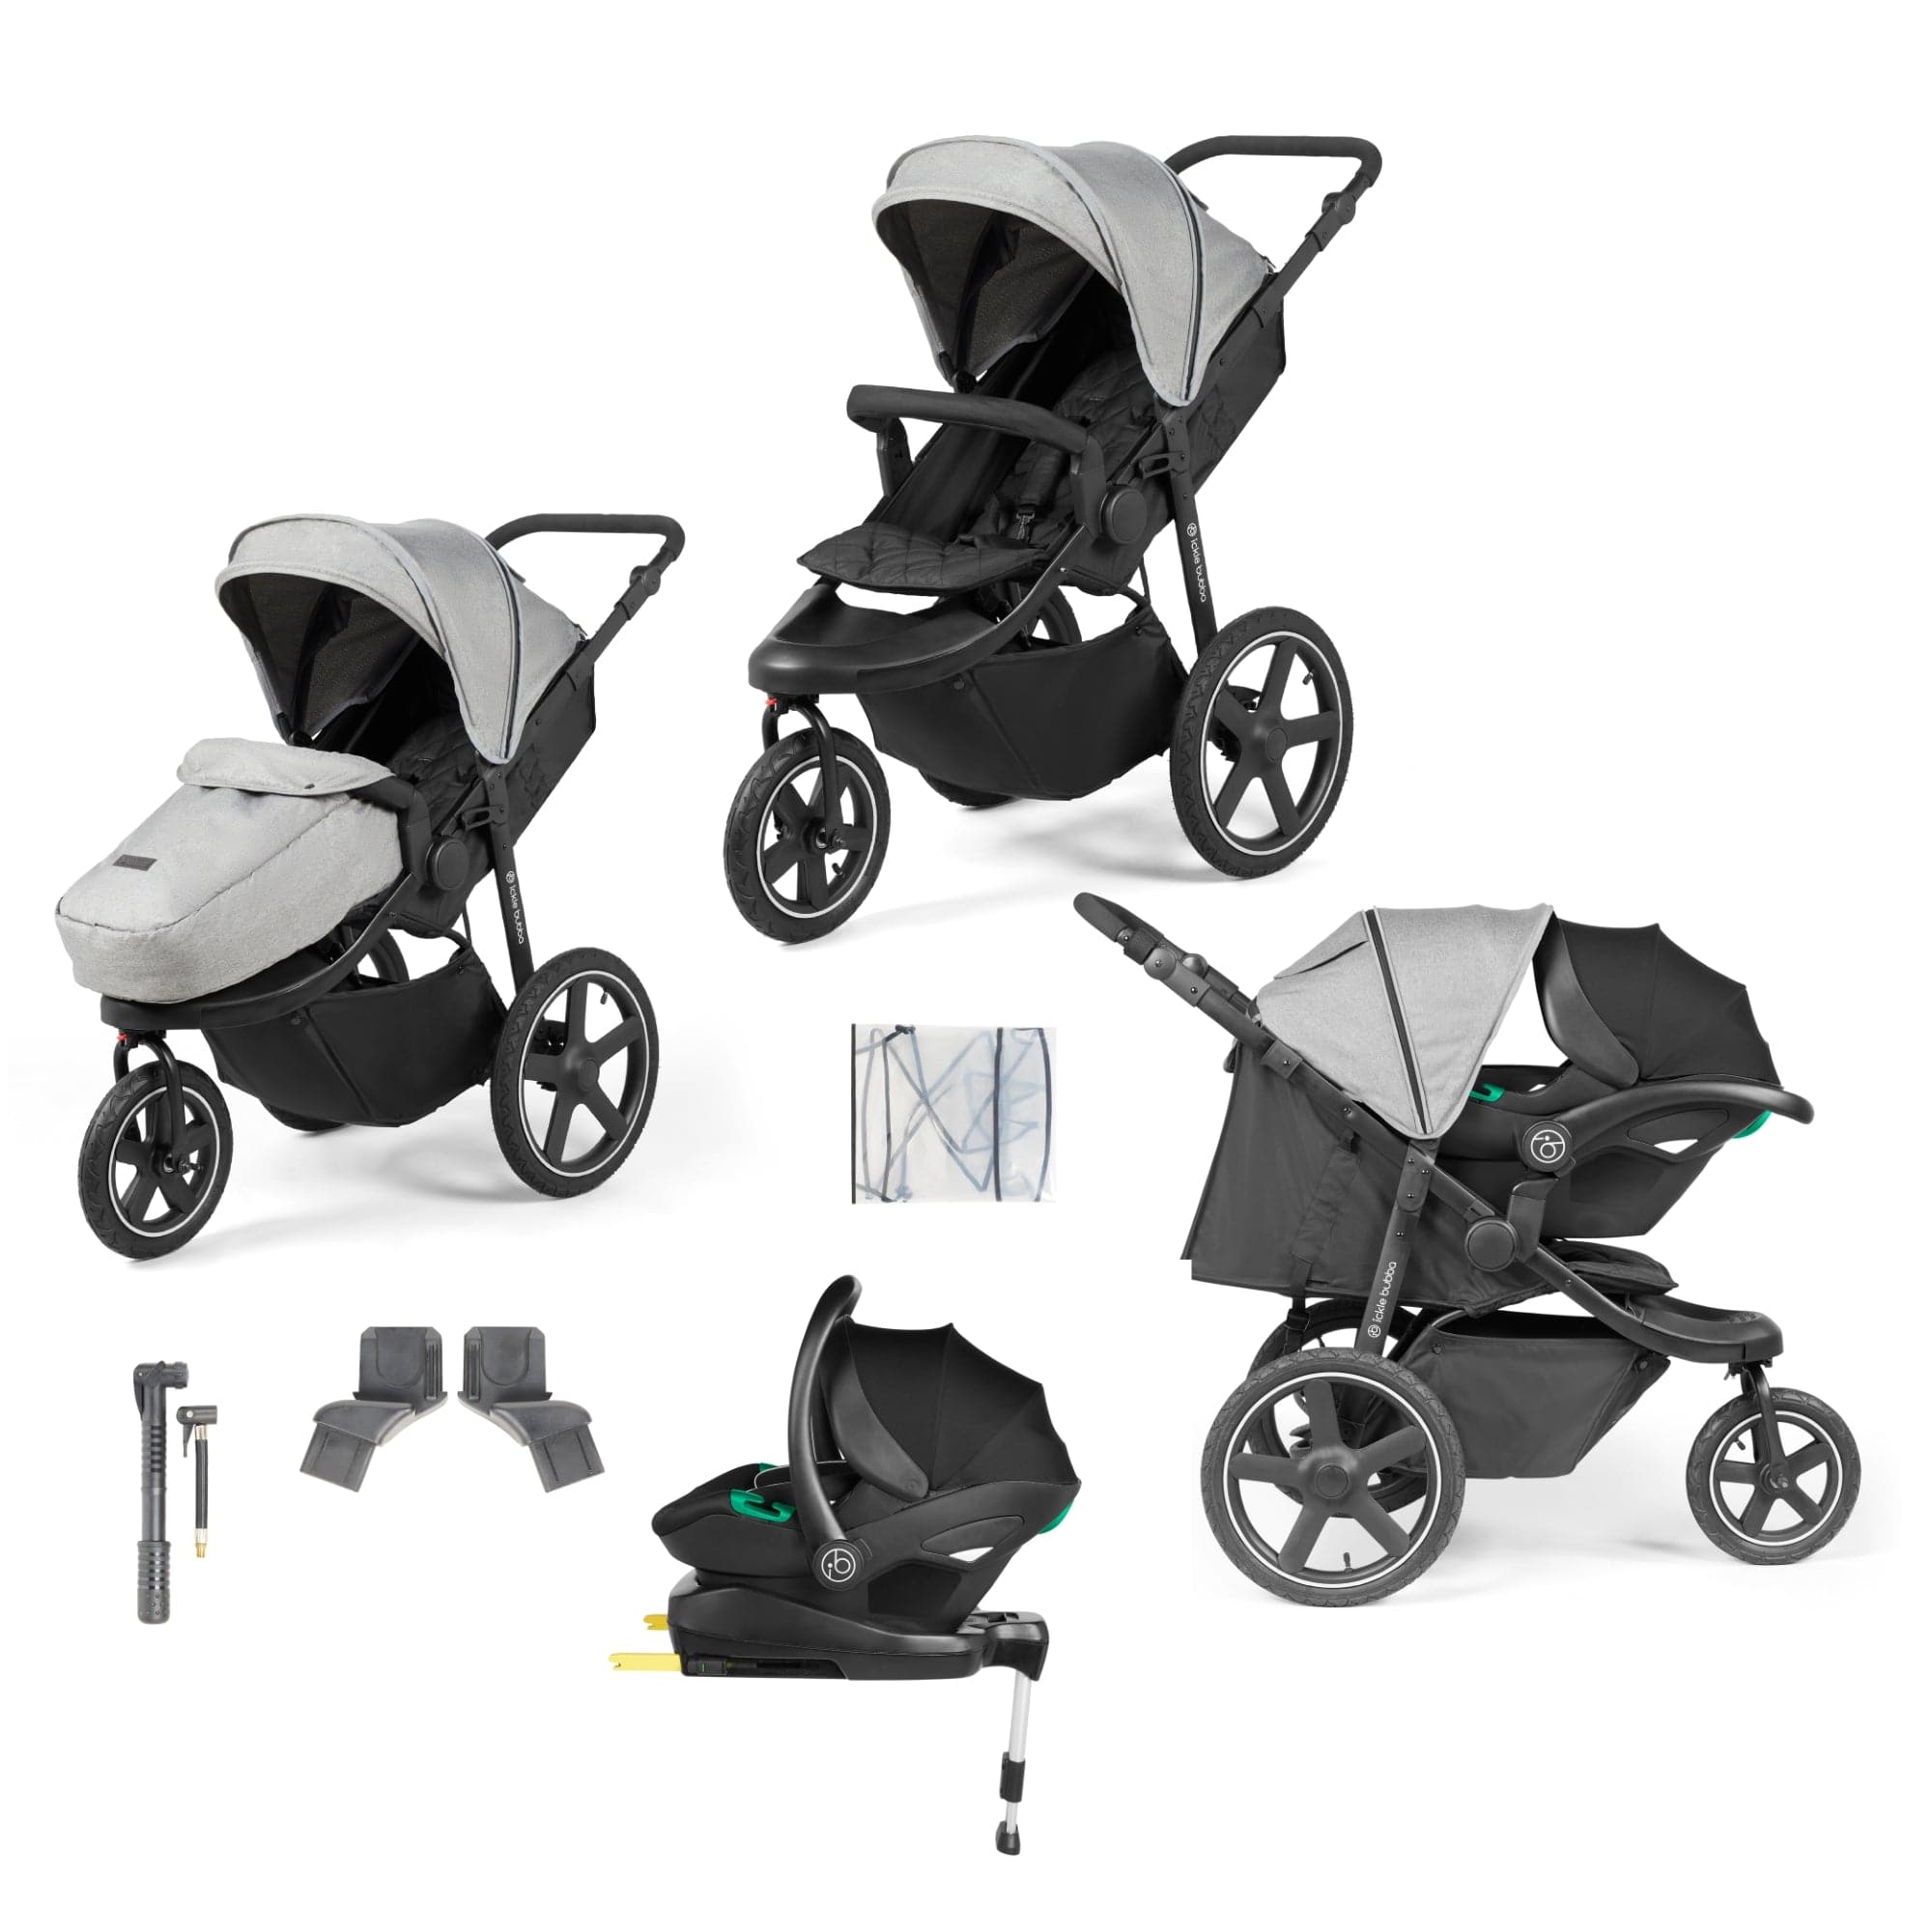 Ickle Bubba Venus Venus Max Jogger 3 Wheel Stroller I-Size Travel System with Isofix Base - Space Grey   